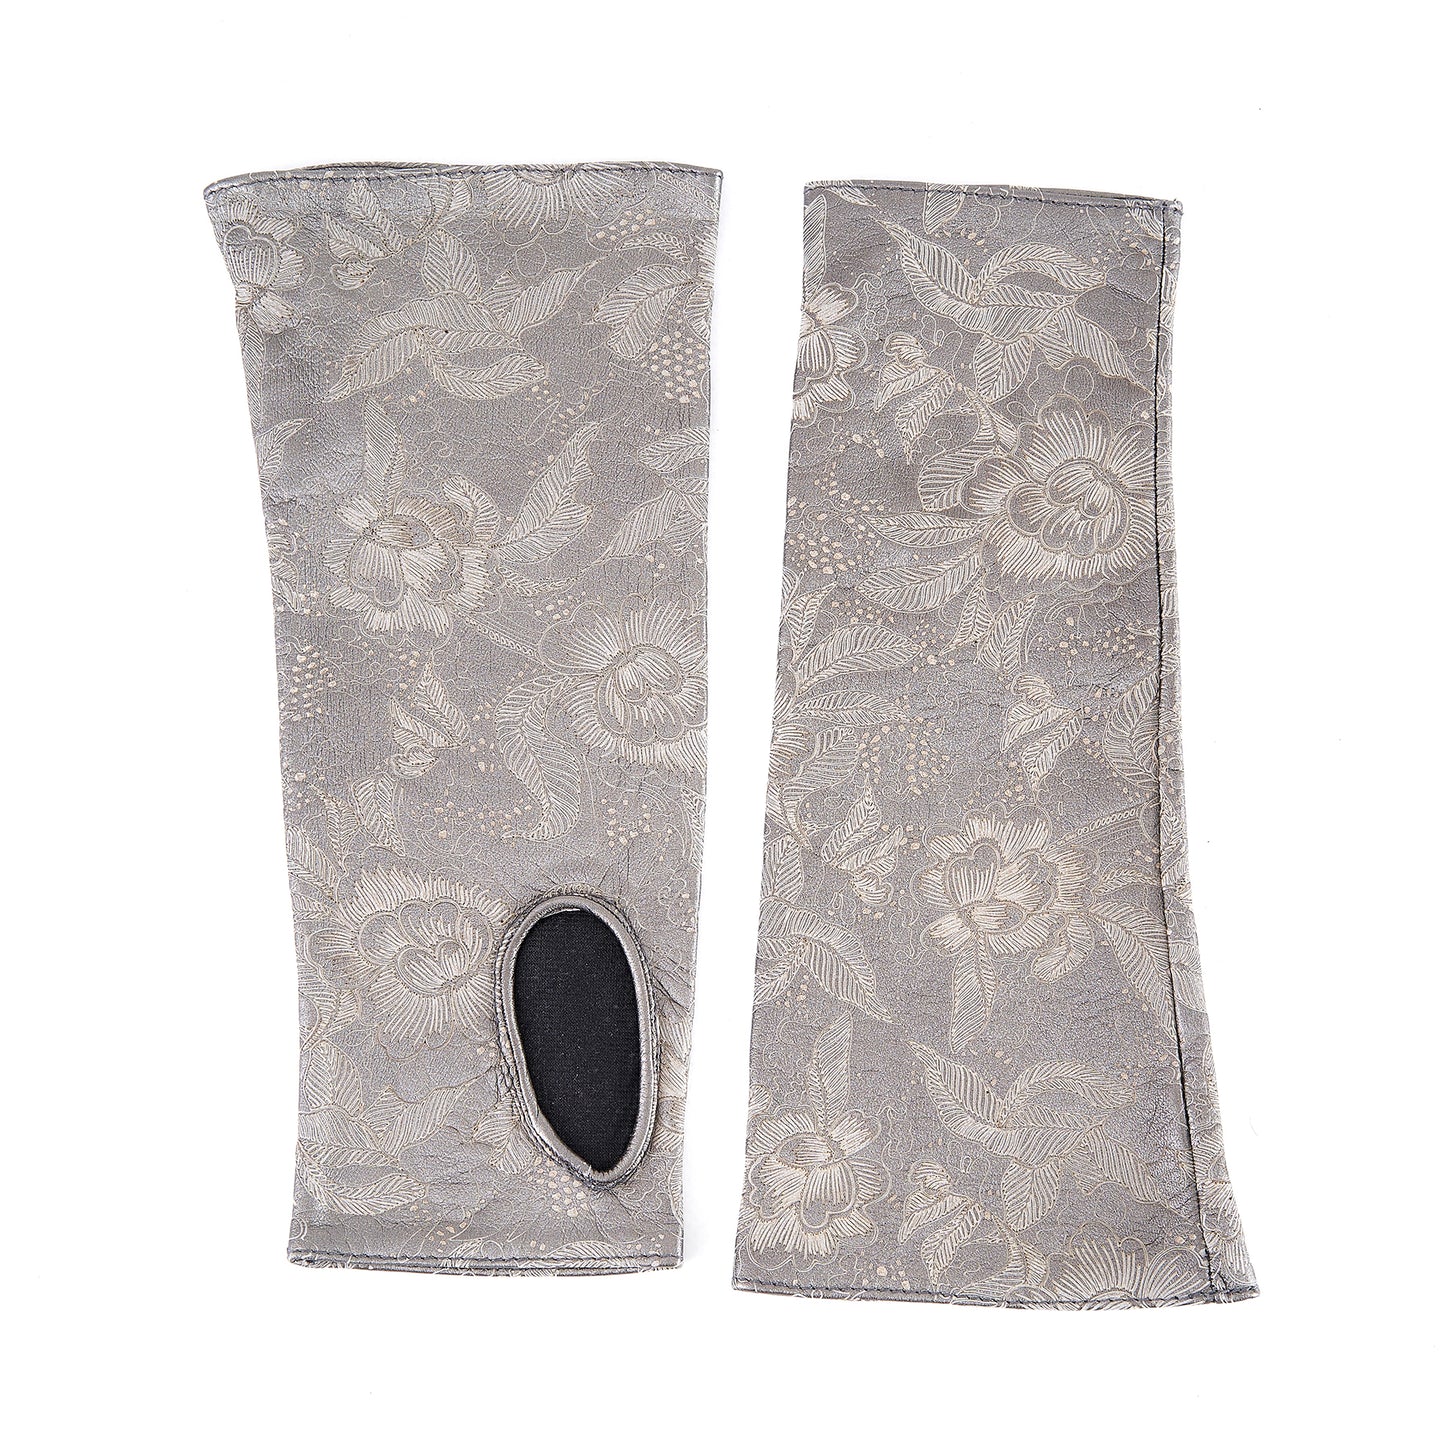 Women's fingerless printed metallic silver grey leather gloves with silk lining